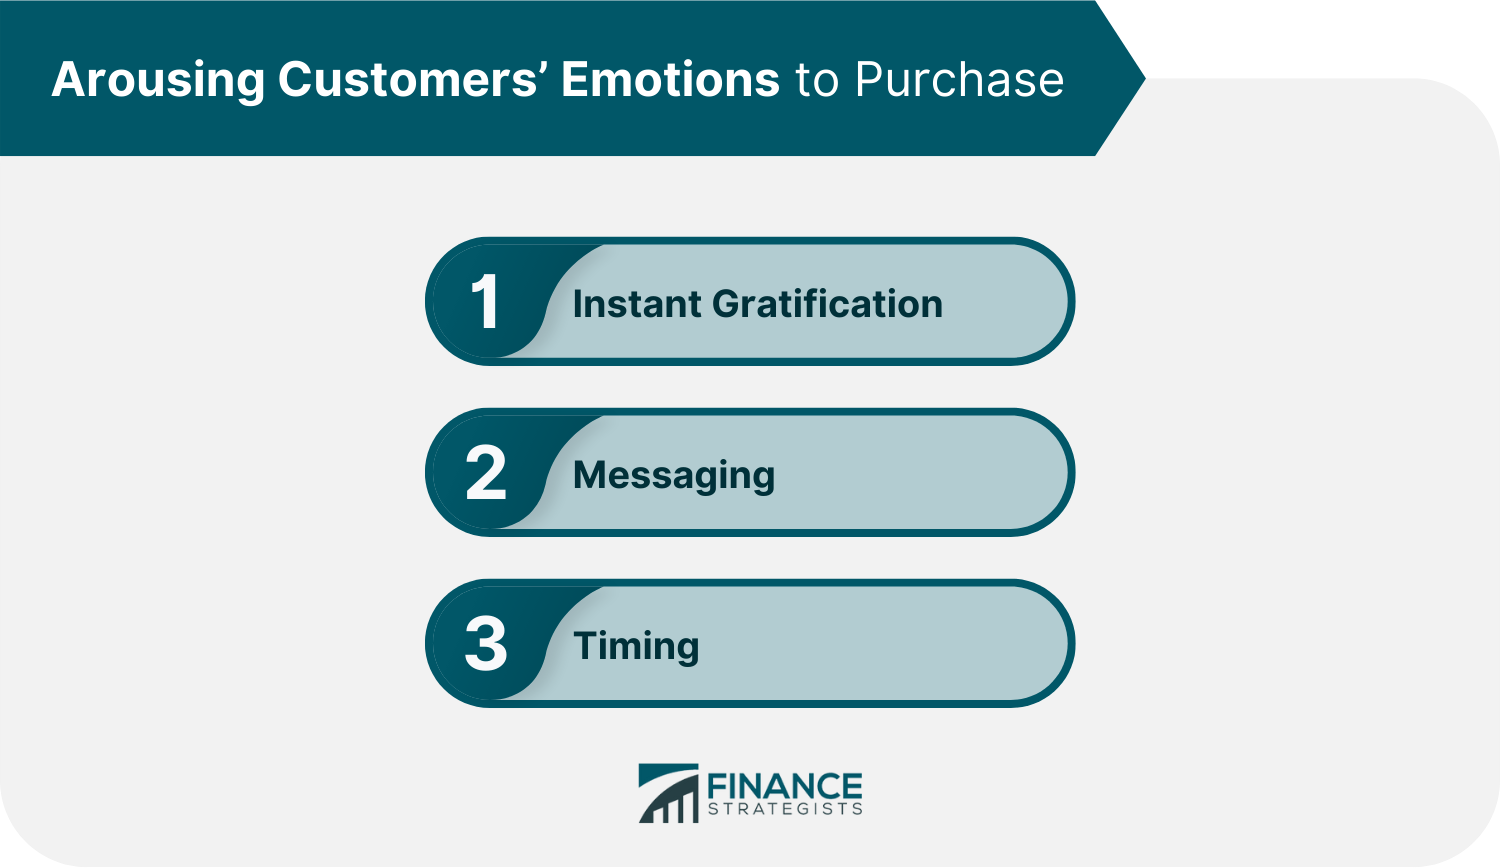 Arousing Customers’ Emotions to Purchase